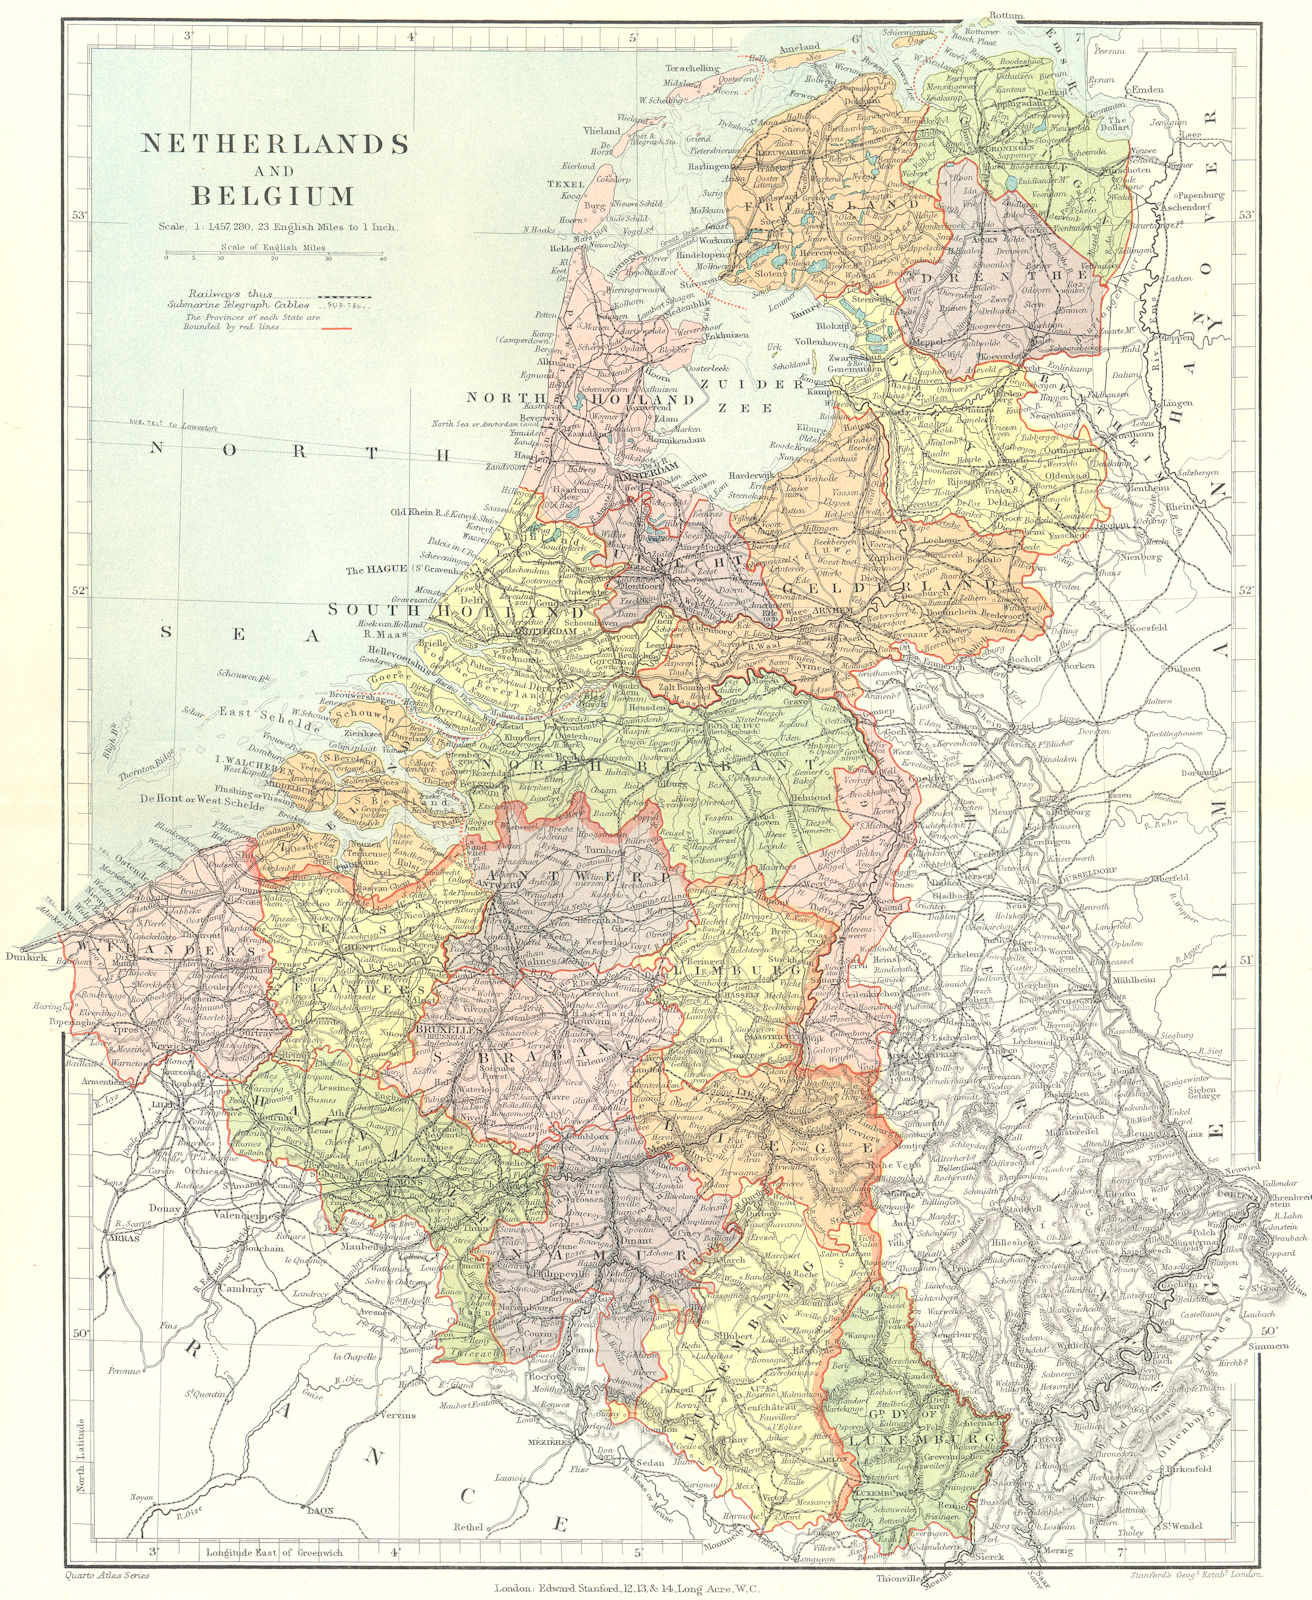 BENELUX. Netherlands, Belgium & Luxembourg showing provinces. STANFORD 1906 map